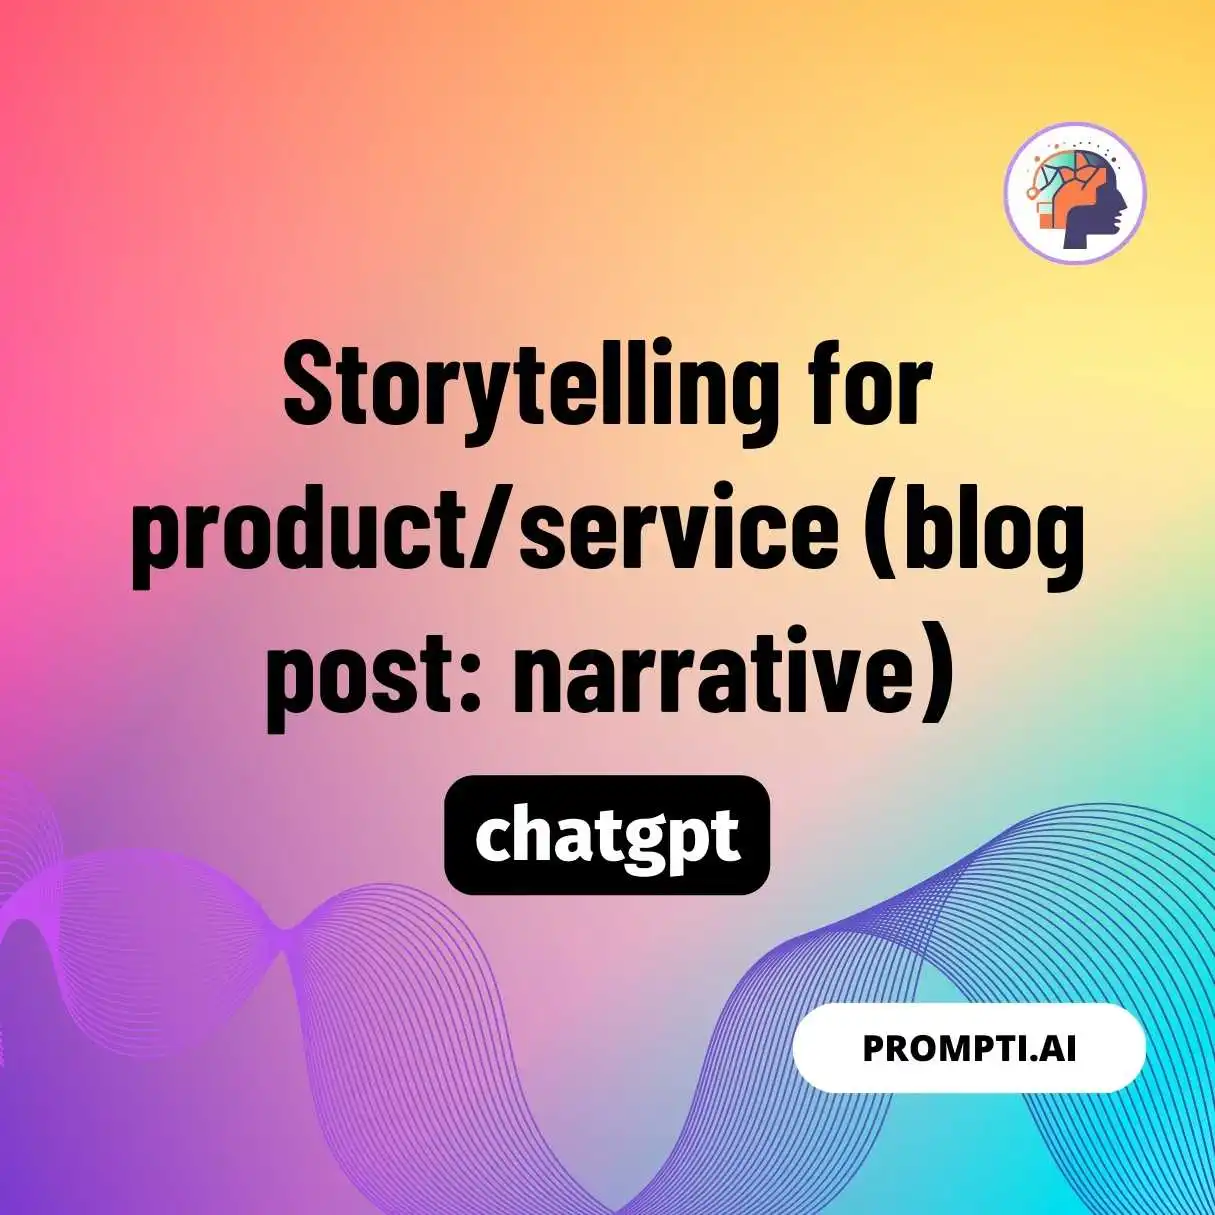 Storytelling for product/service (blog post: narrative)